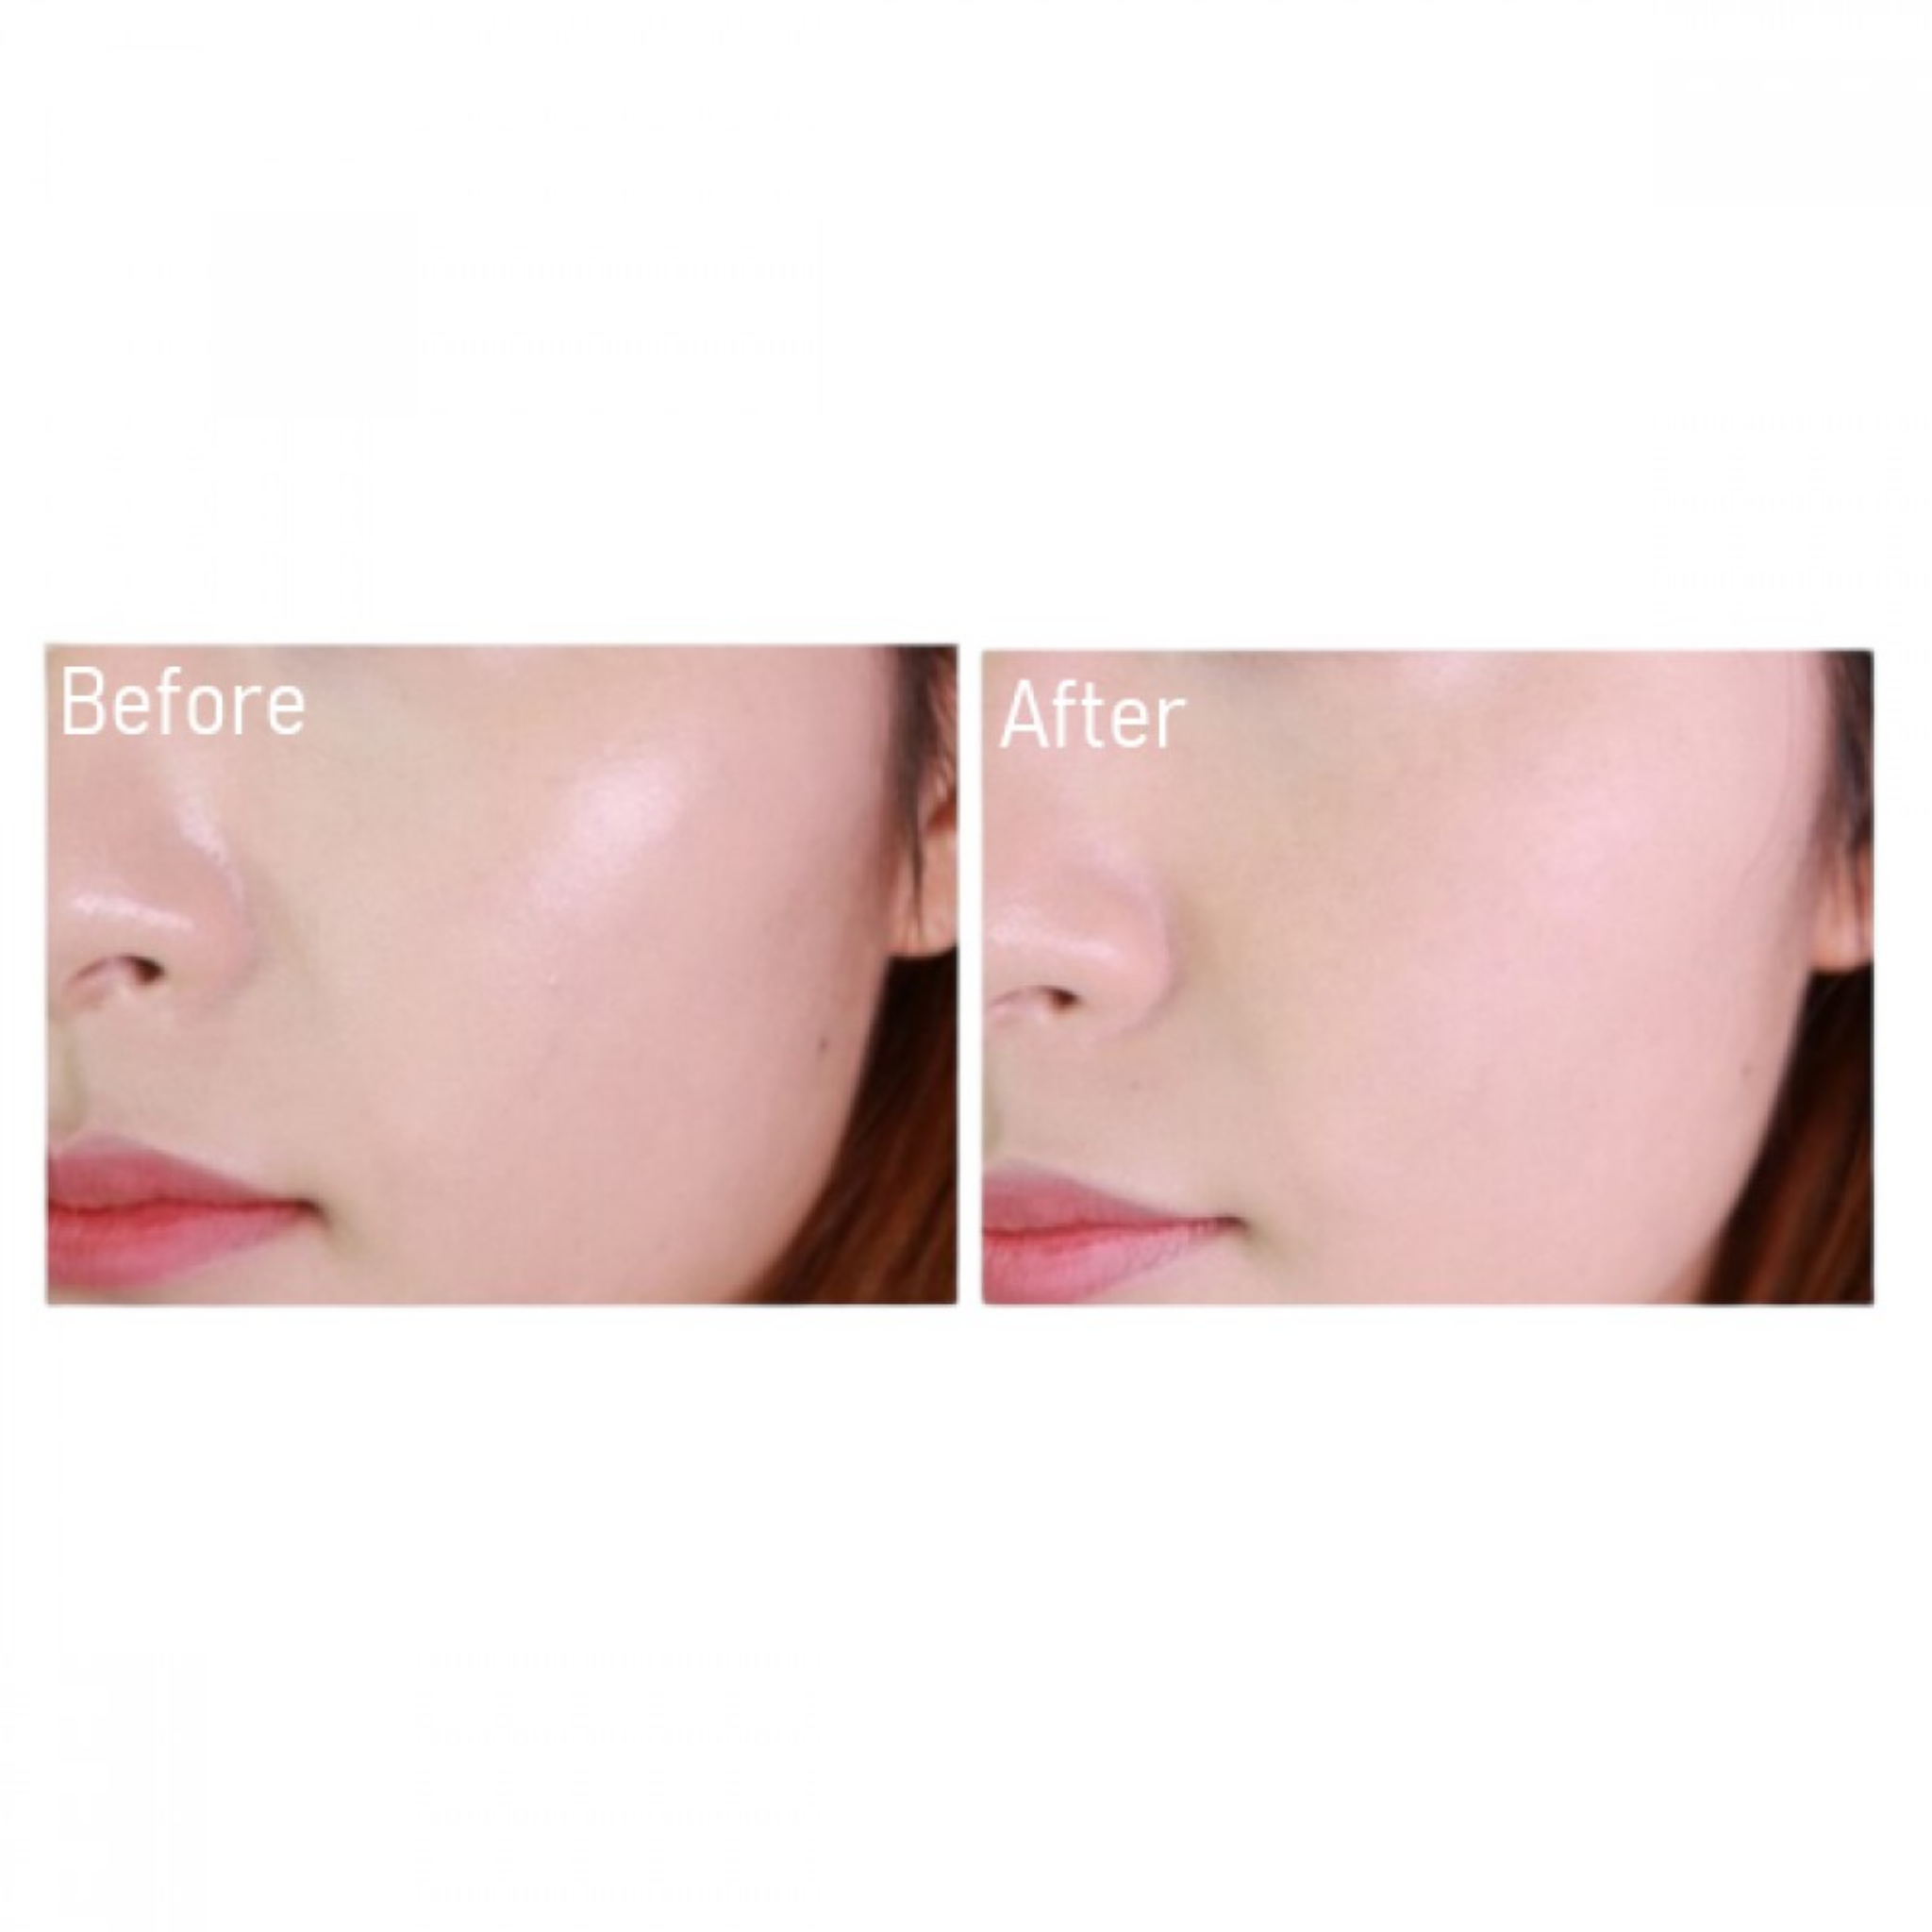 DR ALTHEA Dear.A Face Blur Finishing Powder (8g) before and afer